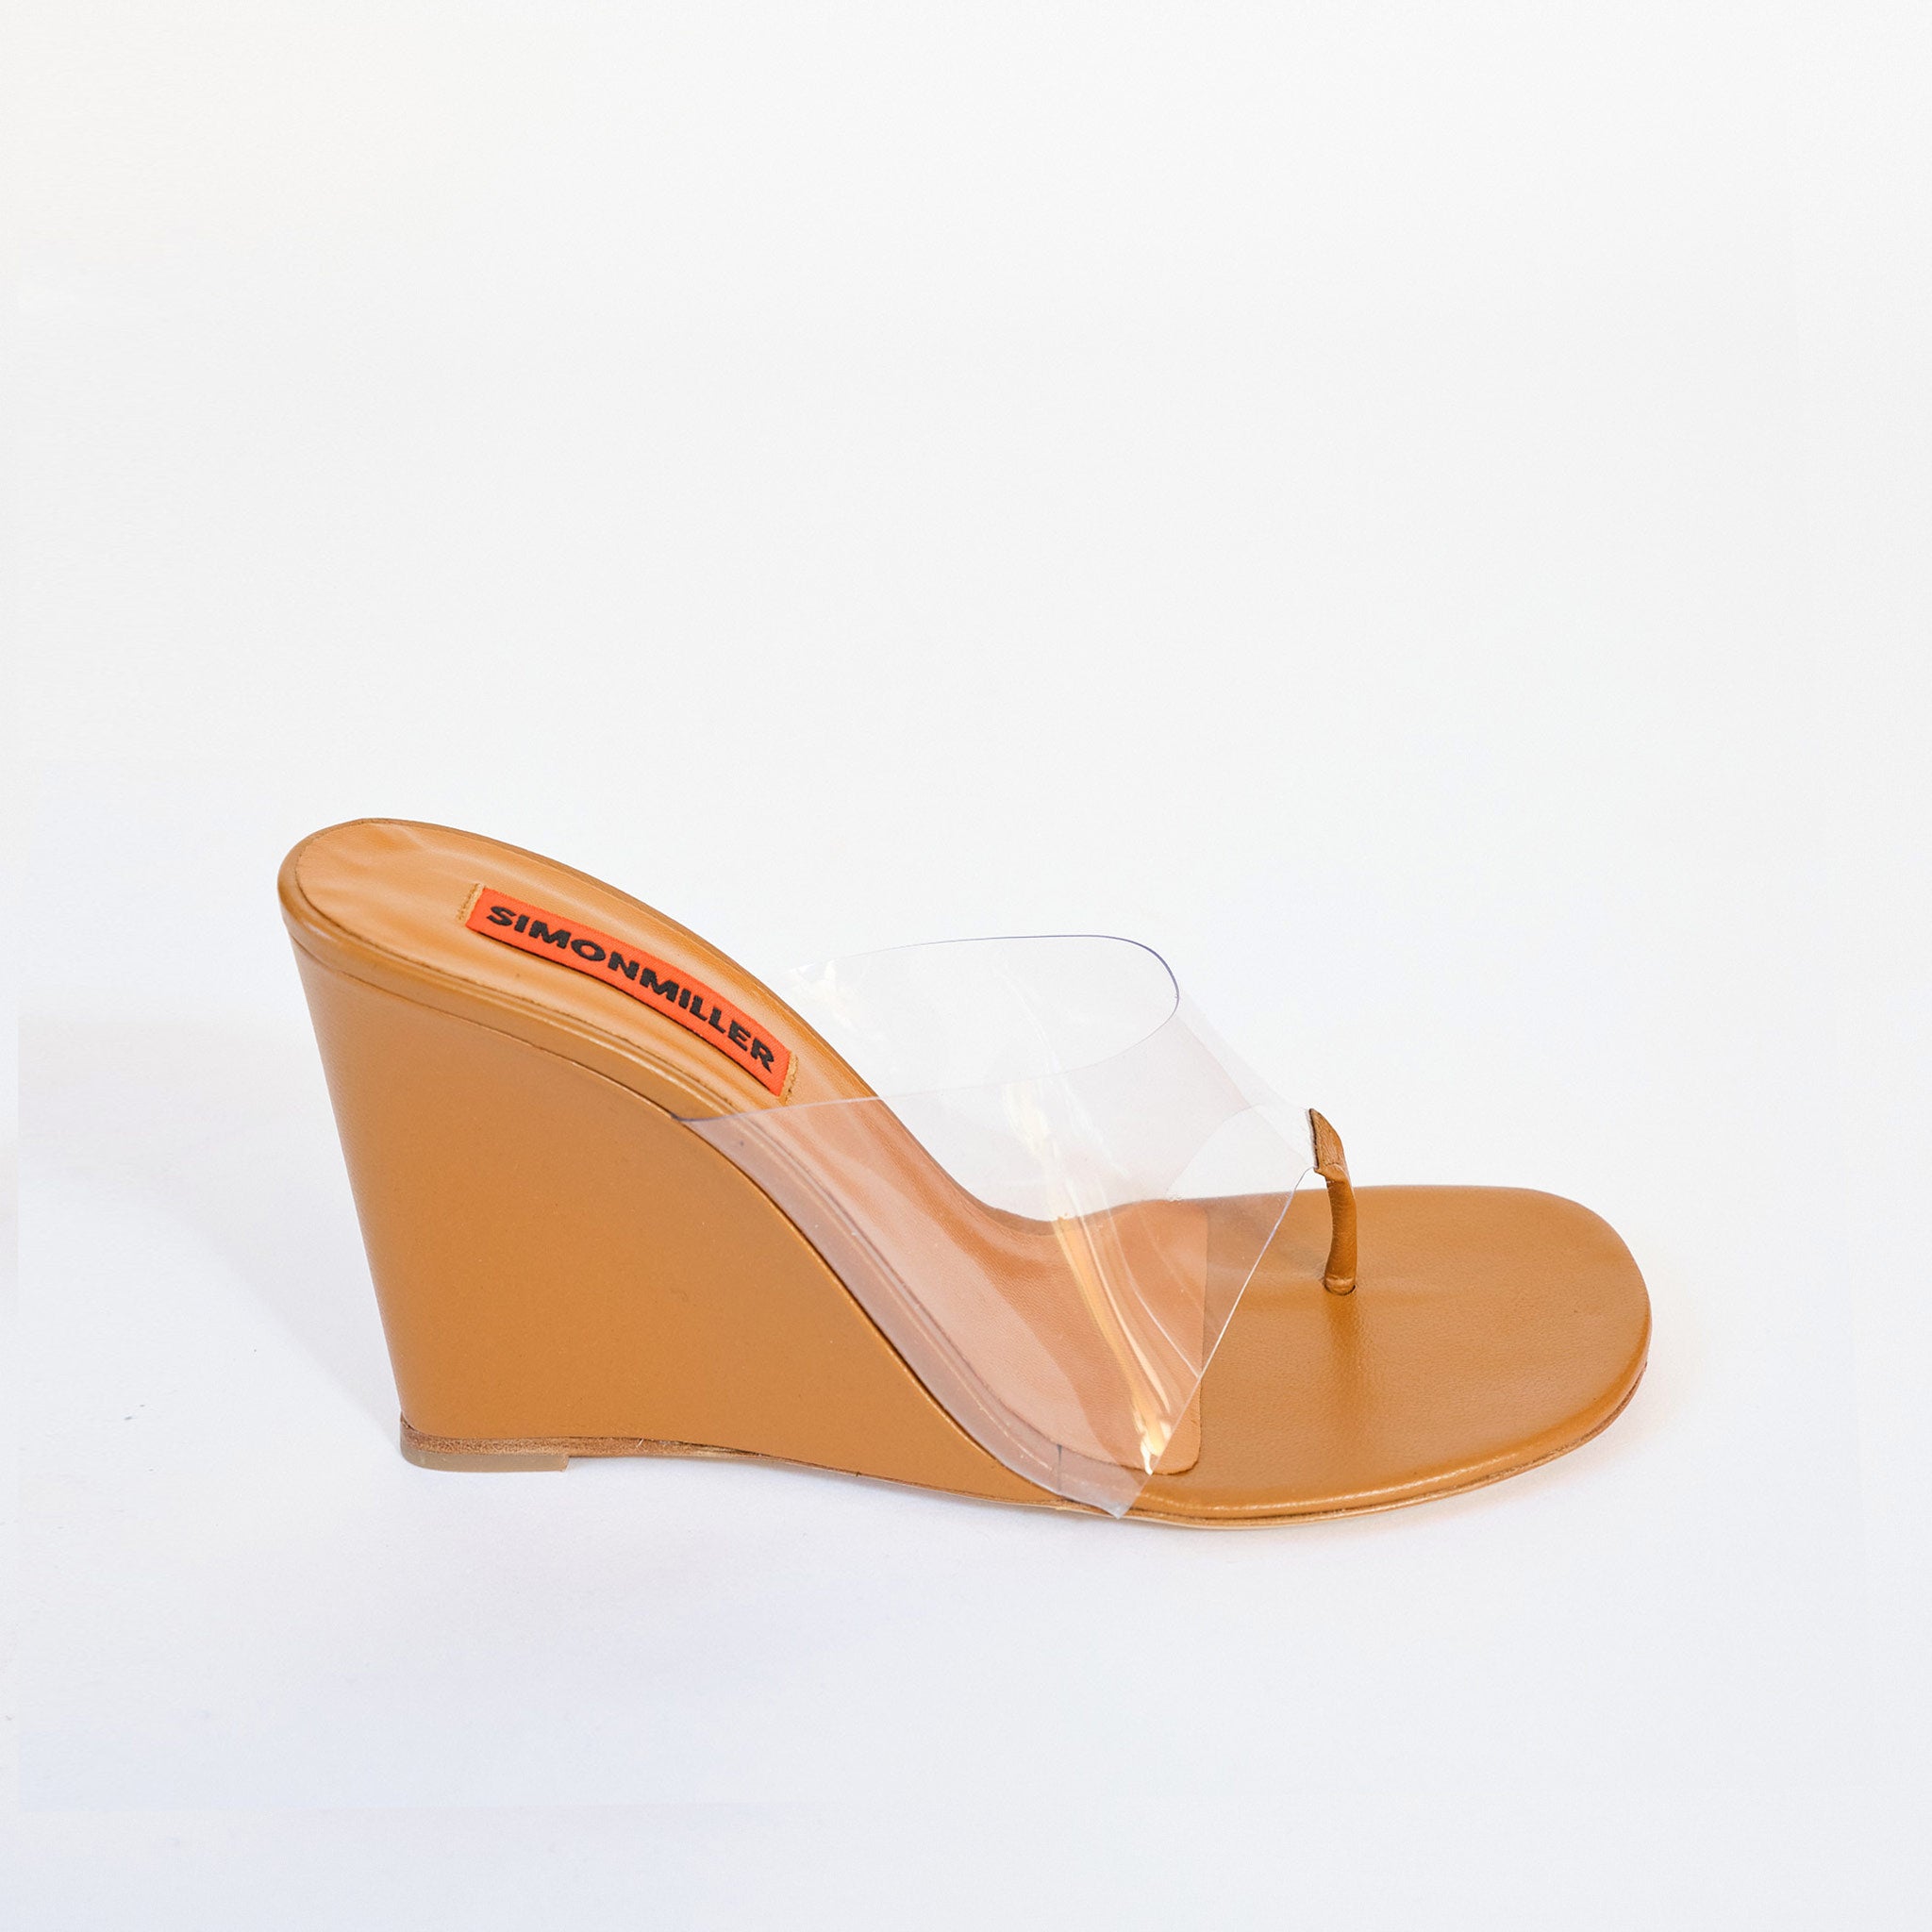 Side view of a high heel wedge sandal with clear PVC upper and thong detail, in toffee brown vegan leather.